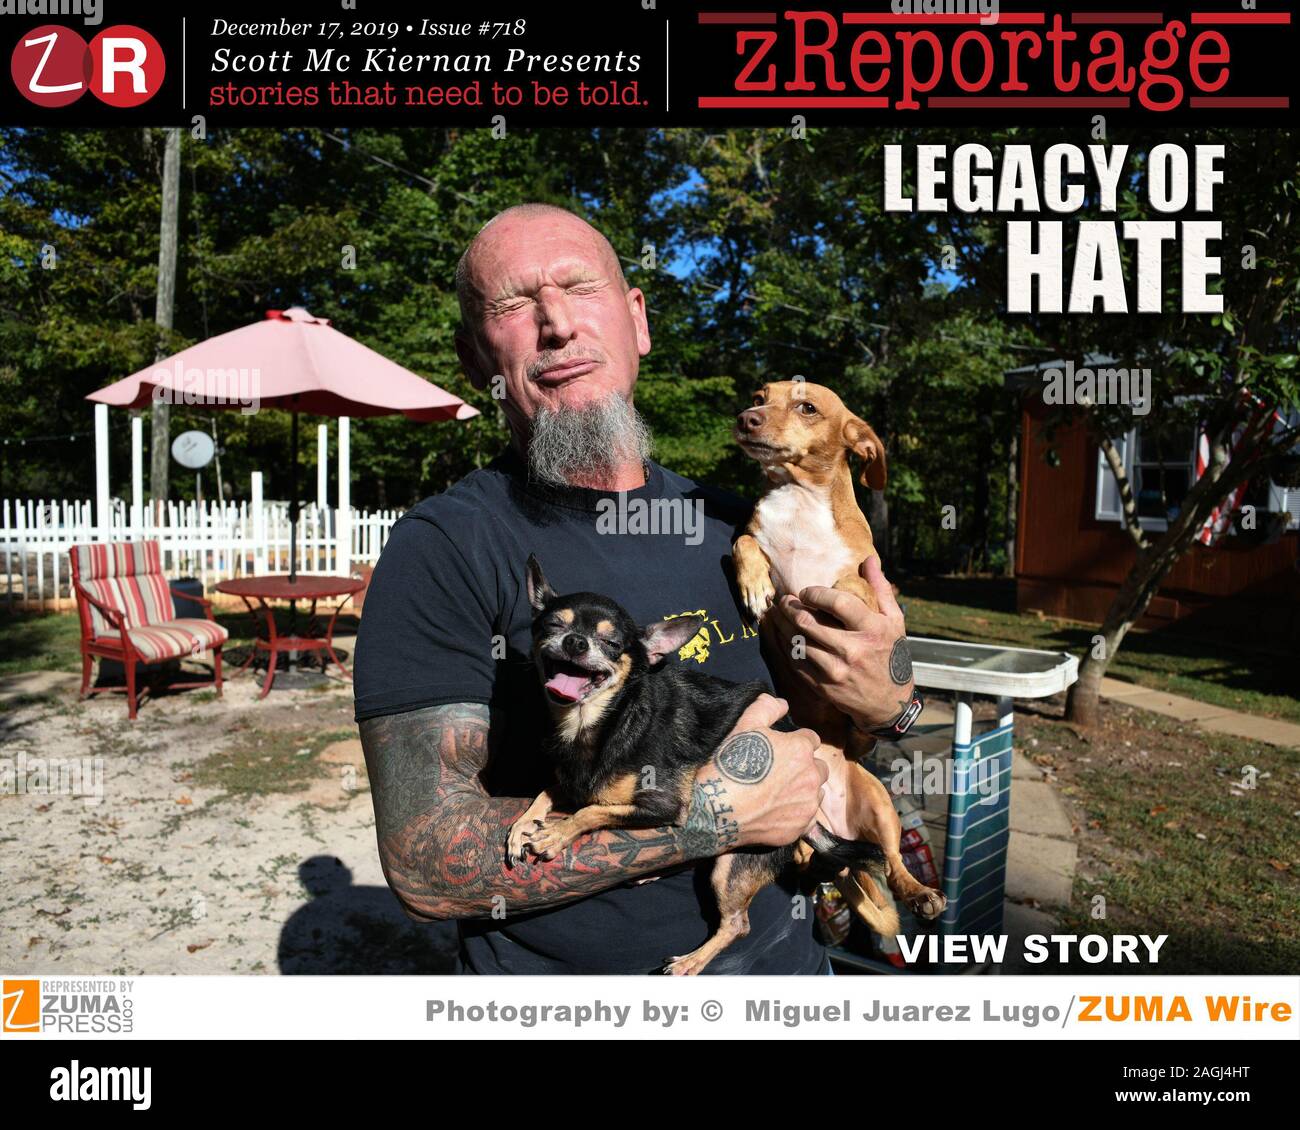 Story of the Week zReportage.com: Launched TUESDAY December 18, 2019 on zReportage.com Story #718: Legacy Of Hate: White Supremacist groups emerged early-on in the history of United States. They usually operated clandestinely, in an attempt to avoid the attention of law enforcement and the media. Historically, these groups relied primarily on word-of-mouth notoriety to intimidate their intended targets. Their numbers were sporadic until recently. Now there is unprecedented growth in the number of and membership in, white supremacist groups. According to the Florida Gang Investigators Associati Stock Photo